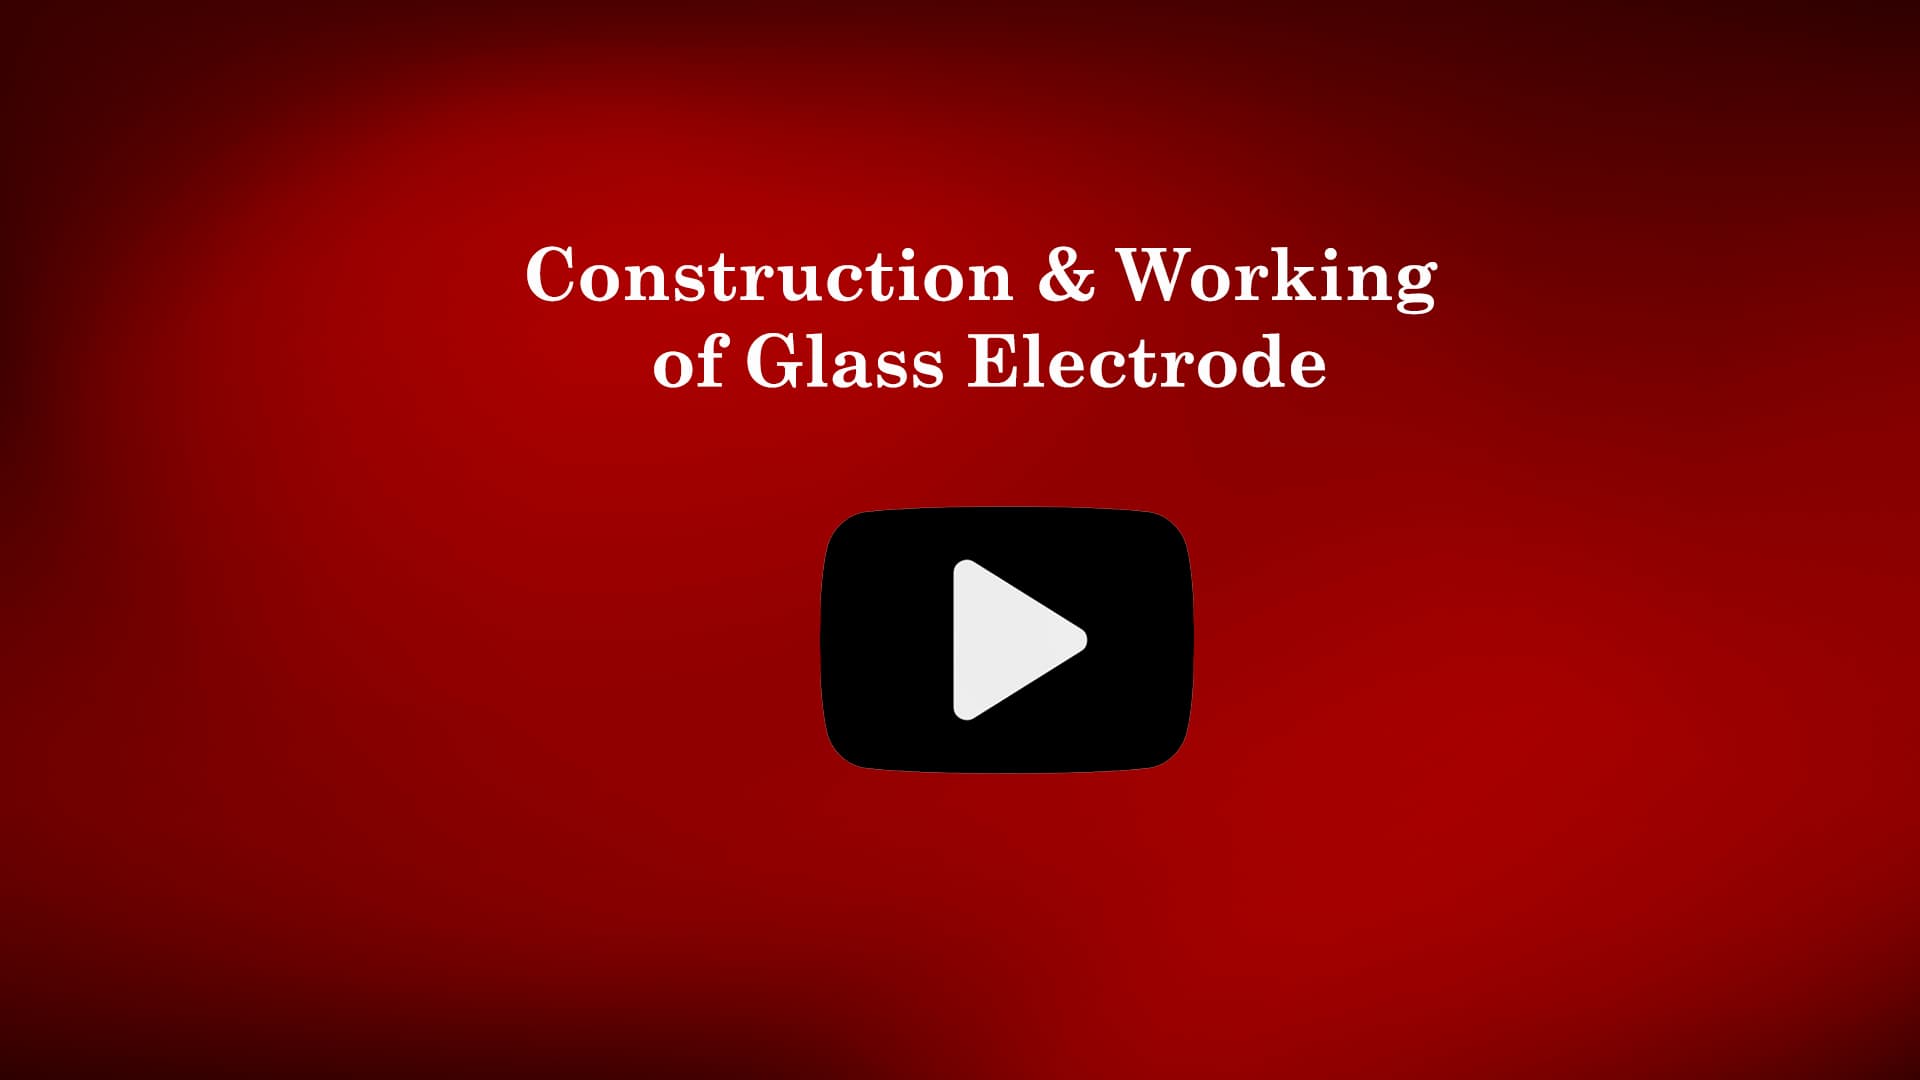 Glass Electrode - Construction & Working | VTU Engineering chemistry